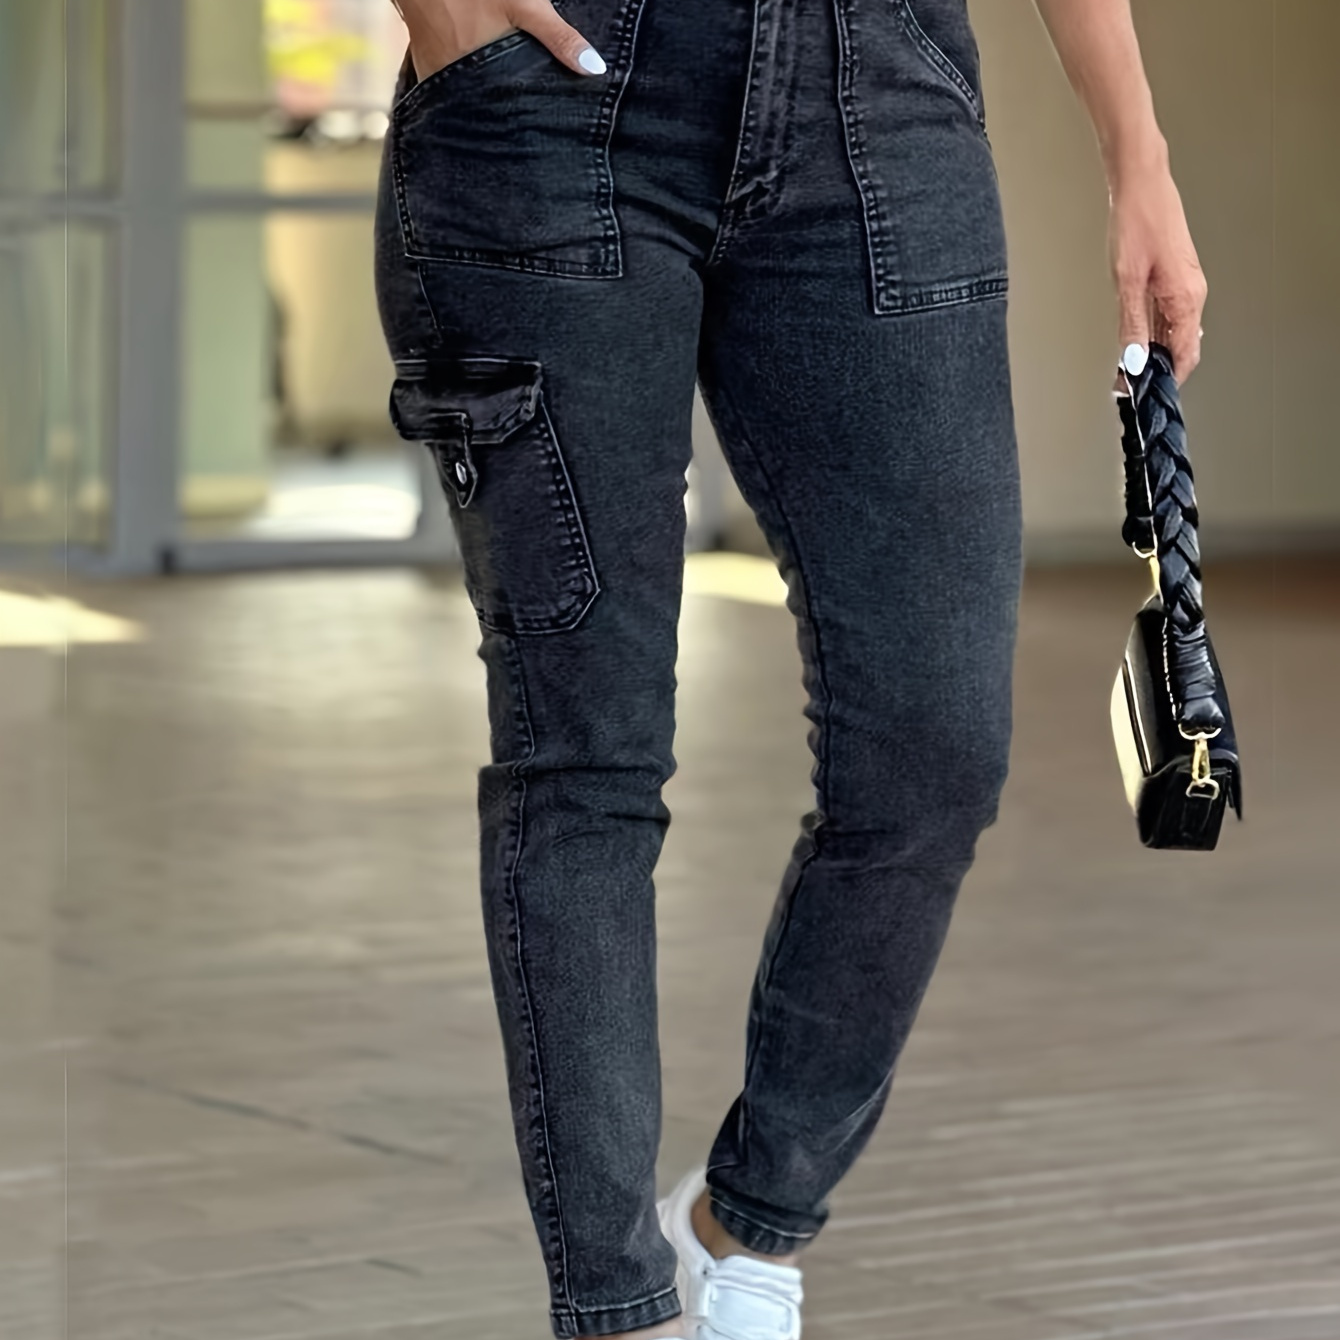 

Women's Fashion Cargo Style Low-rise Stretch Skinny Jeans, Retro Vintage-inspired Denim Pants With Side Pockets, Slimming Streetwear Trousers, Casual Trendy Outfit